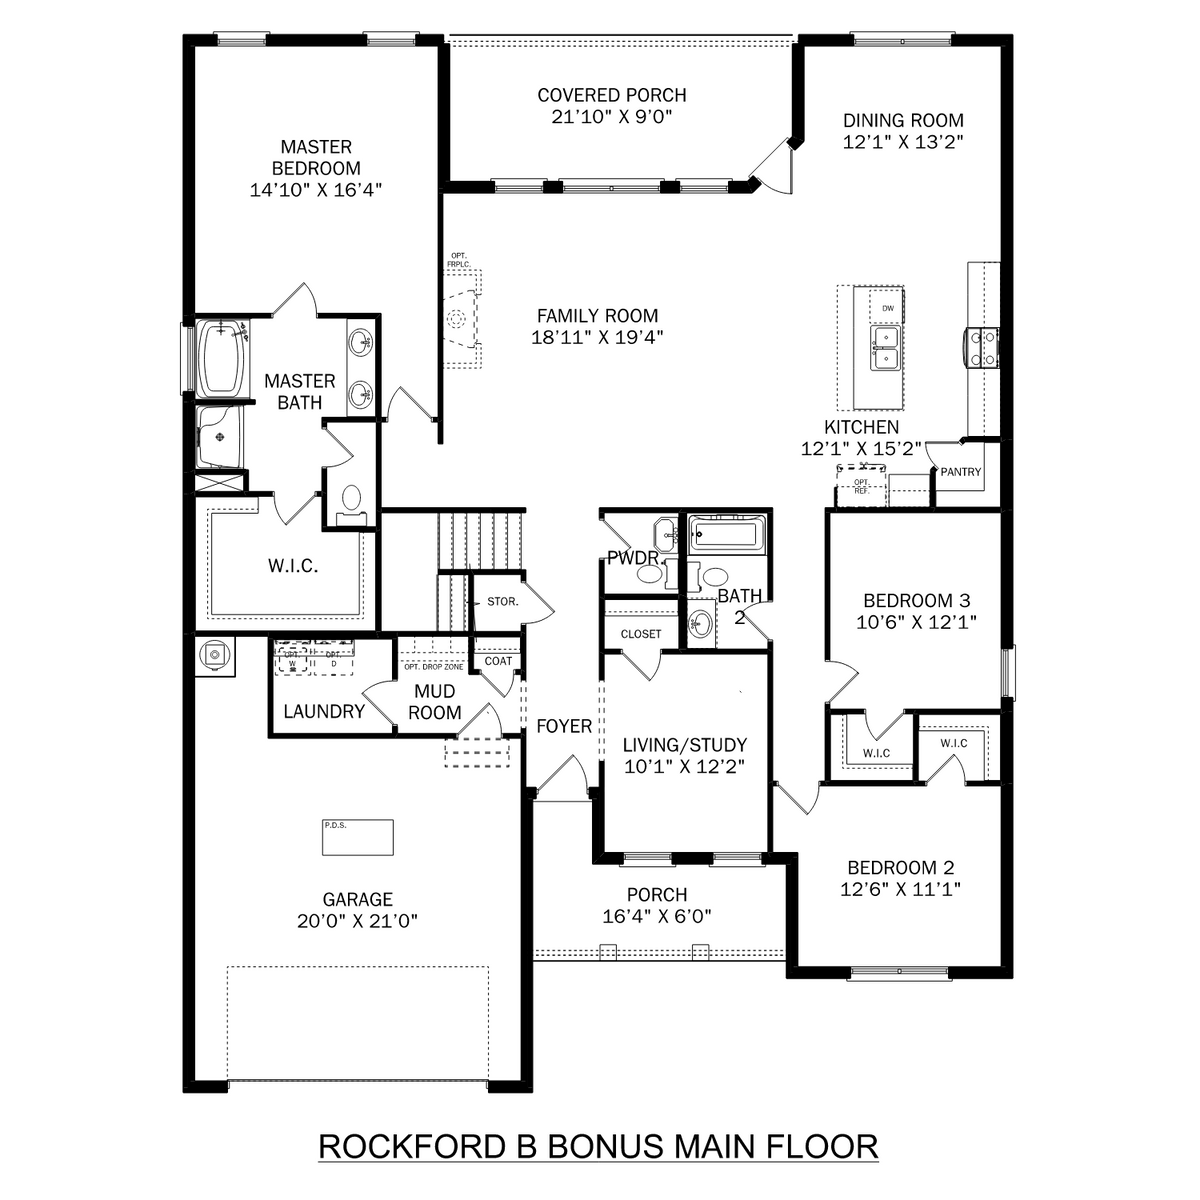 1 - The Rockford B with Bonus buildable floor plan layout in Davidson Homes' Creekside community.